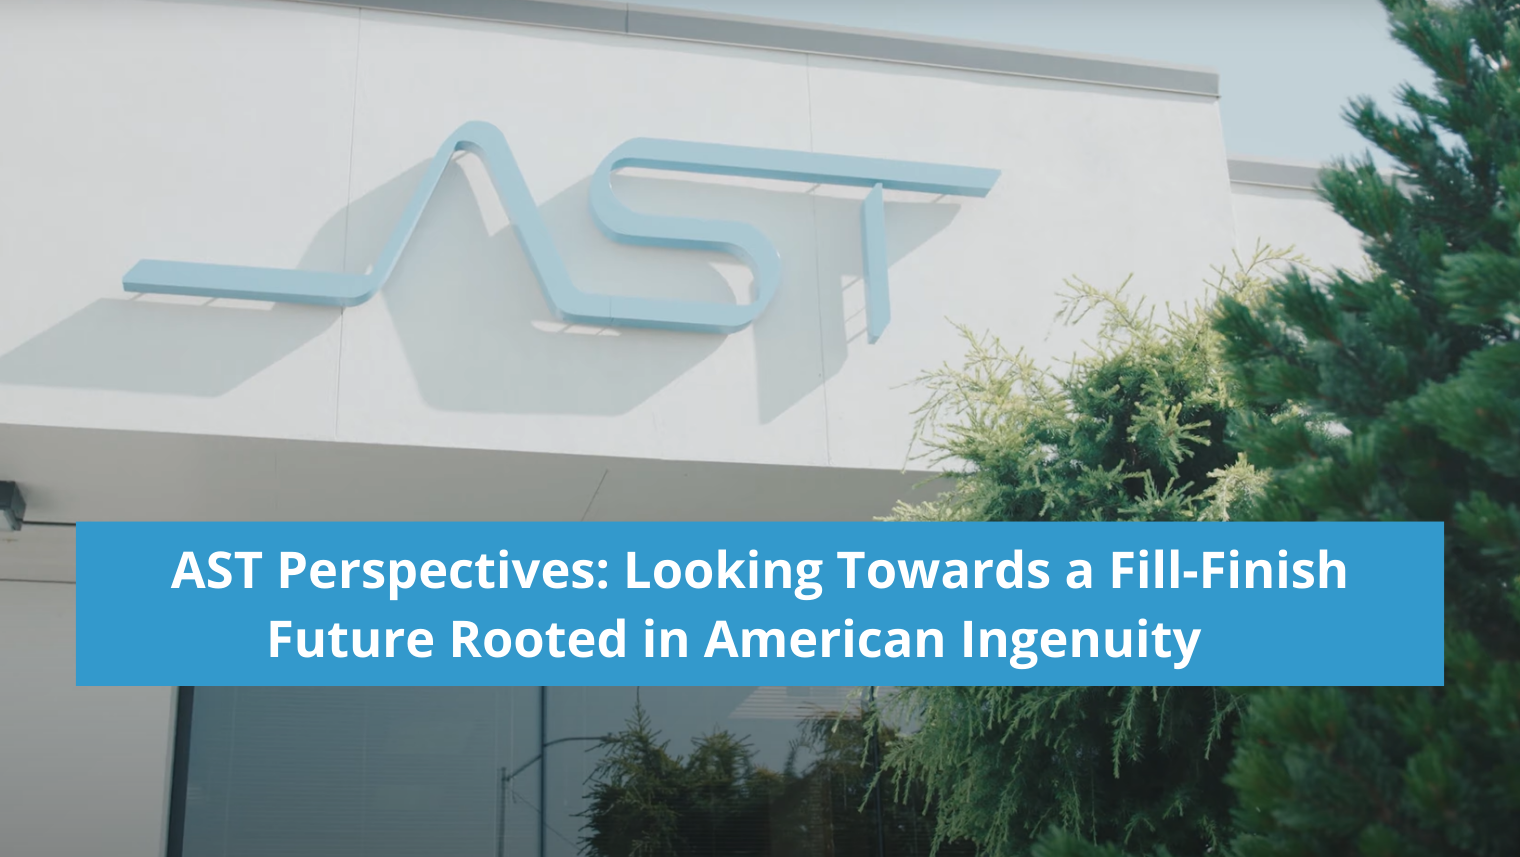 AST Perspectives: Looking Towards a Fill-Finish Future Rooted in American Ingenuity  